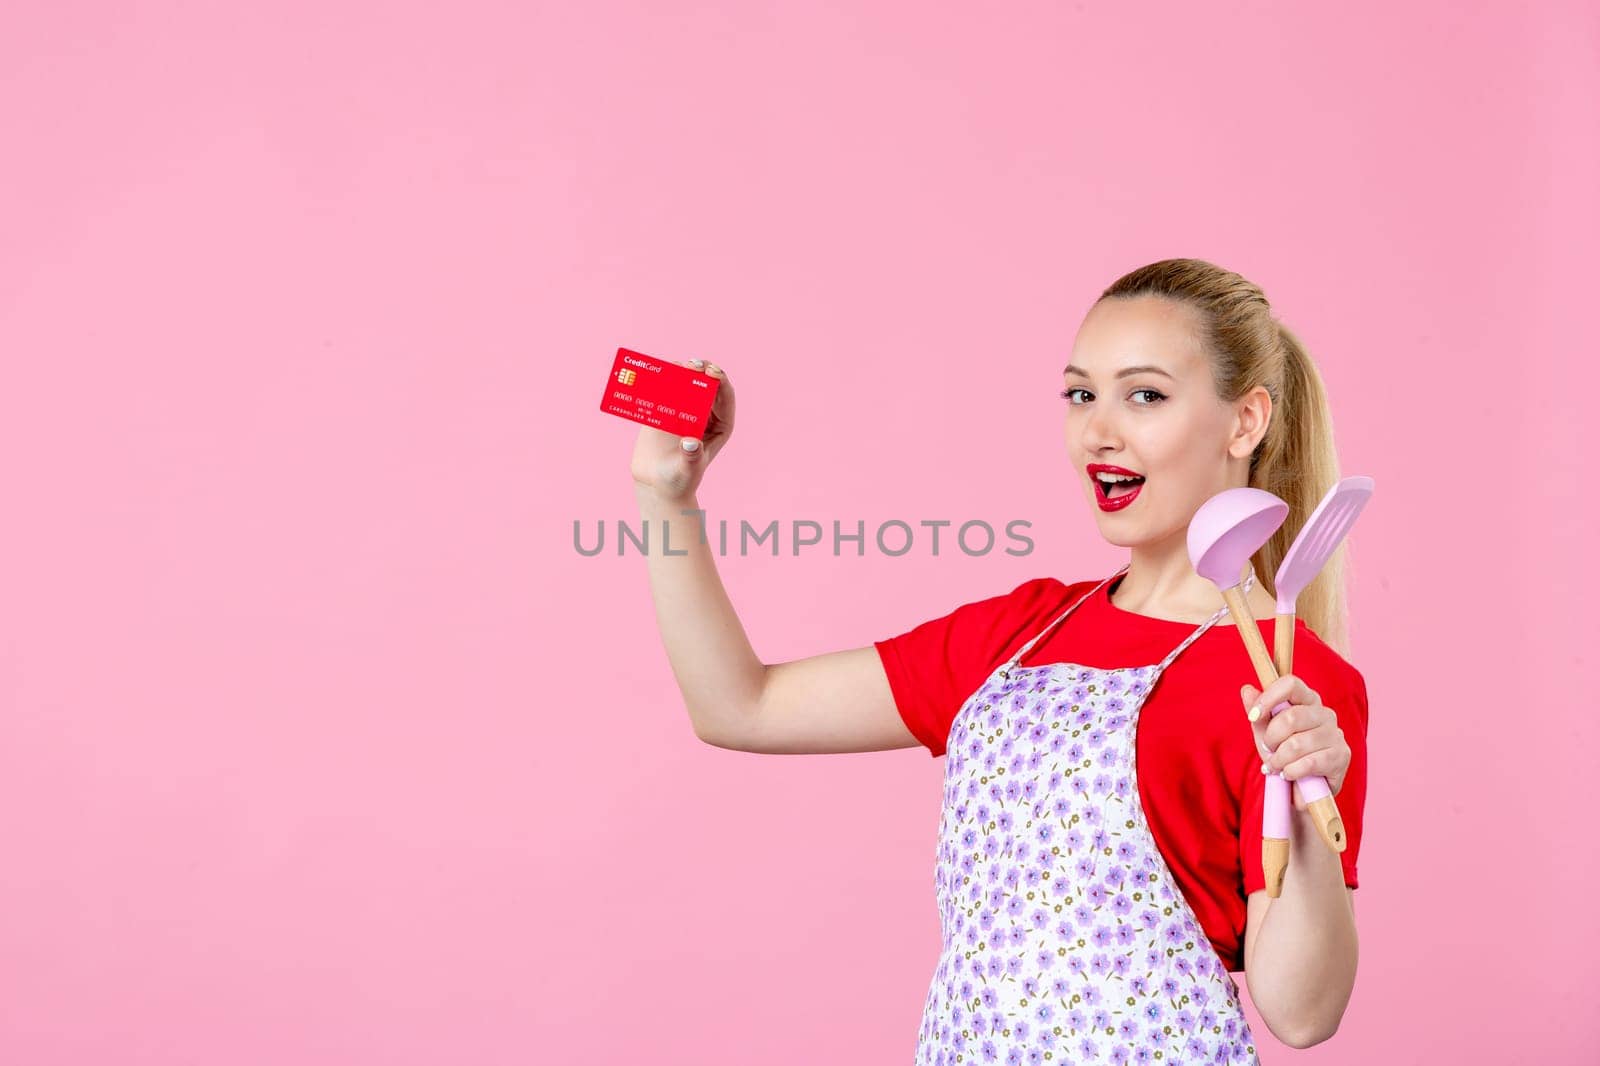 front view young housewife in cape holding spoons and red bank card on pink background profession money occupation duty uniform job cutlery worker horizontal